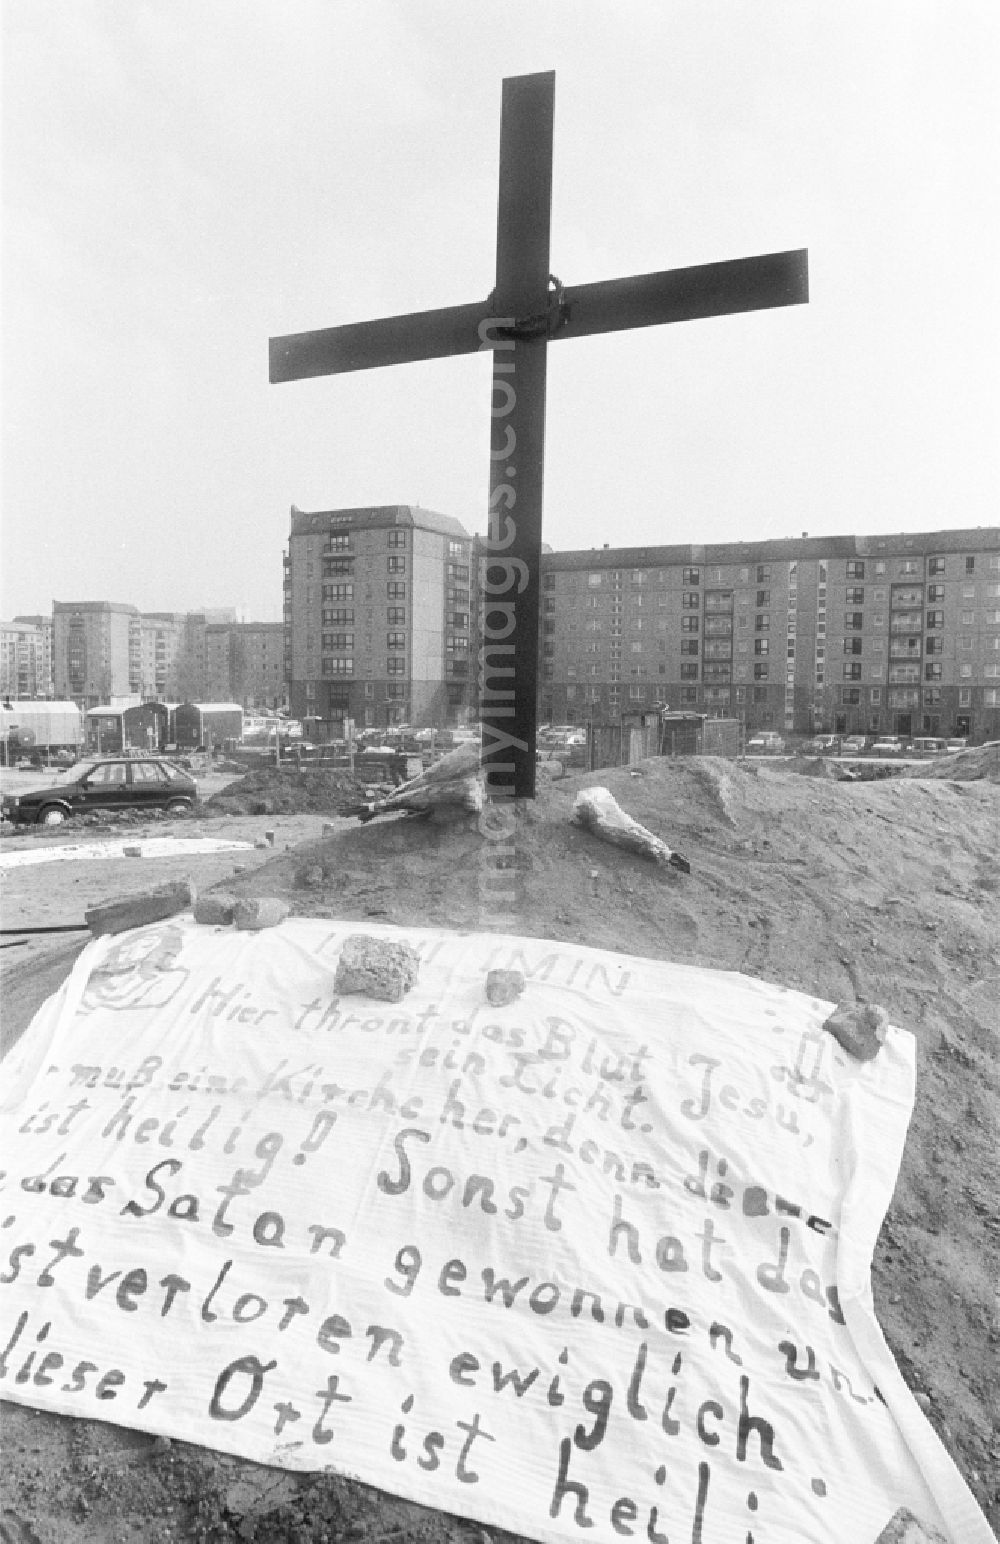 GDR image archive: Berlin - Warning and commemorative cross on the fragments and remains of the concrete bunker systems Fuehrerbunker - Reichskanzlei on Vossstrasse in the district Mitte in Berlin East Berlin on the territory of the former GDR, German Democratic Republic